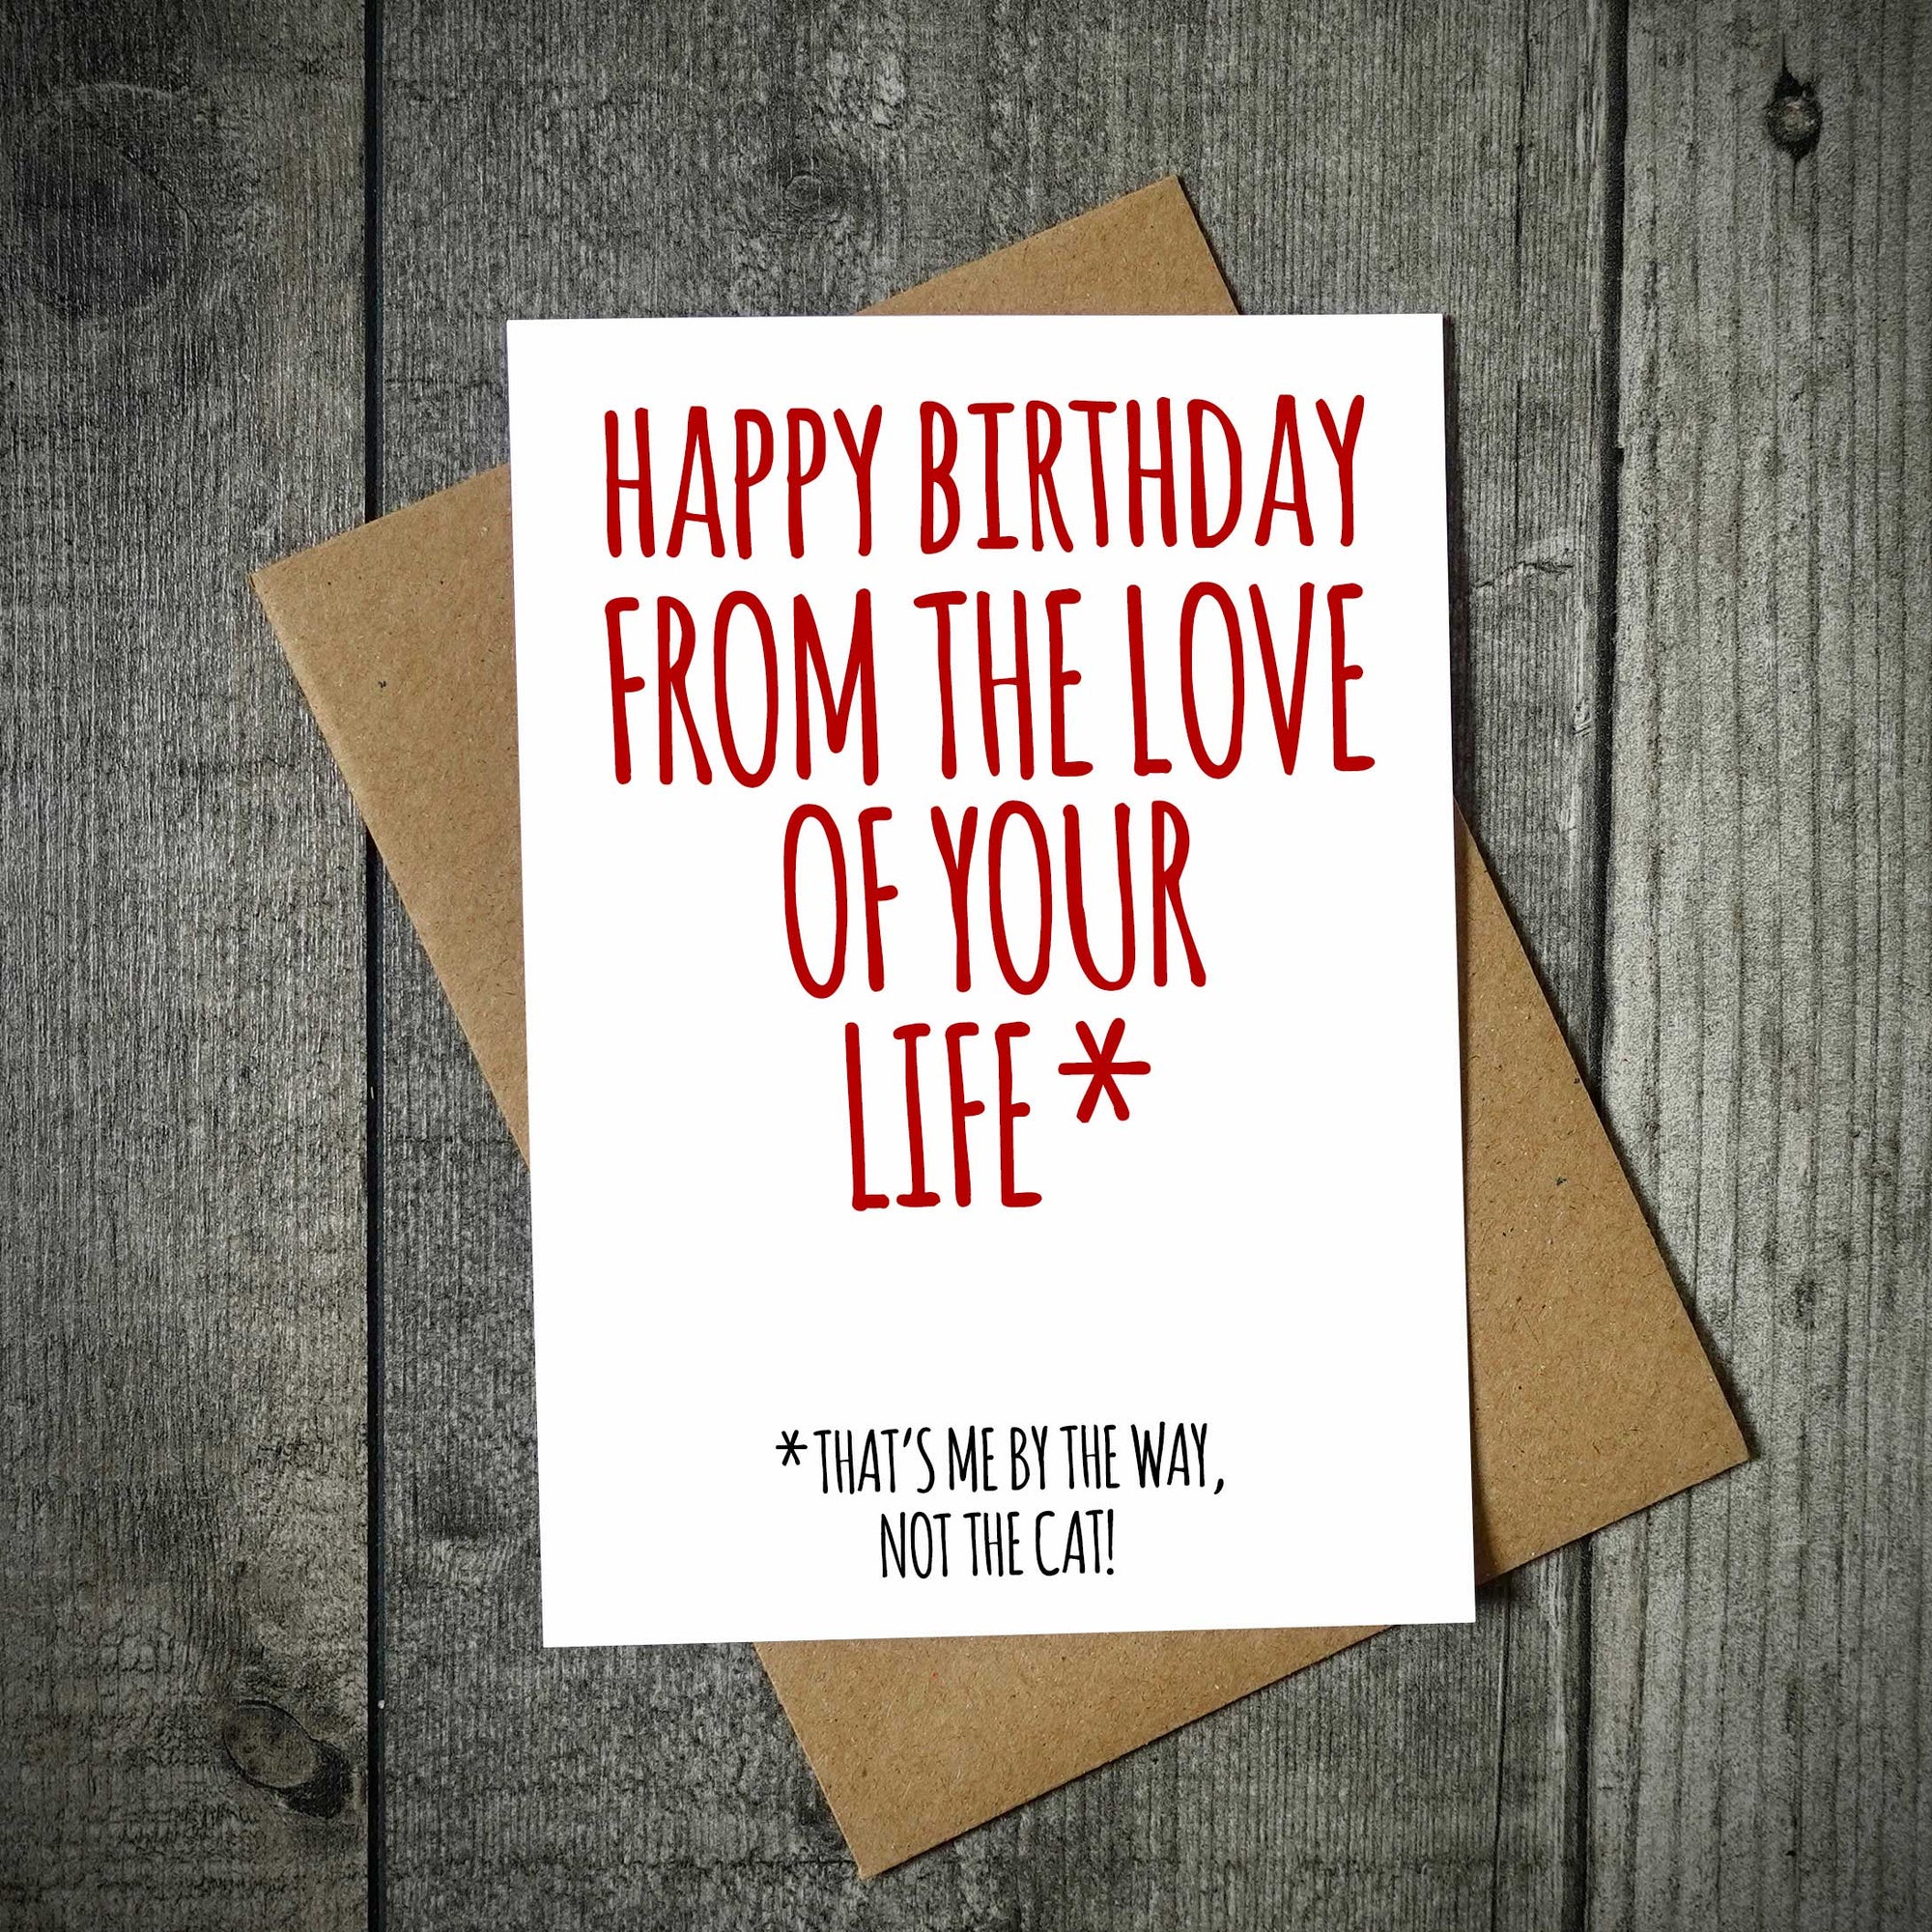 Happy Birthday From The Love Of Your Life Funny Birthday Card - Cat